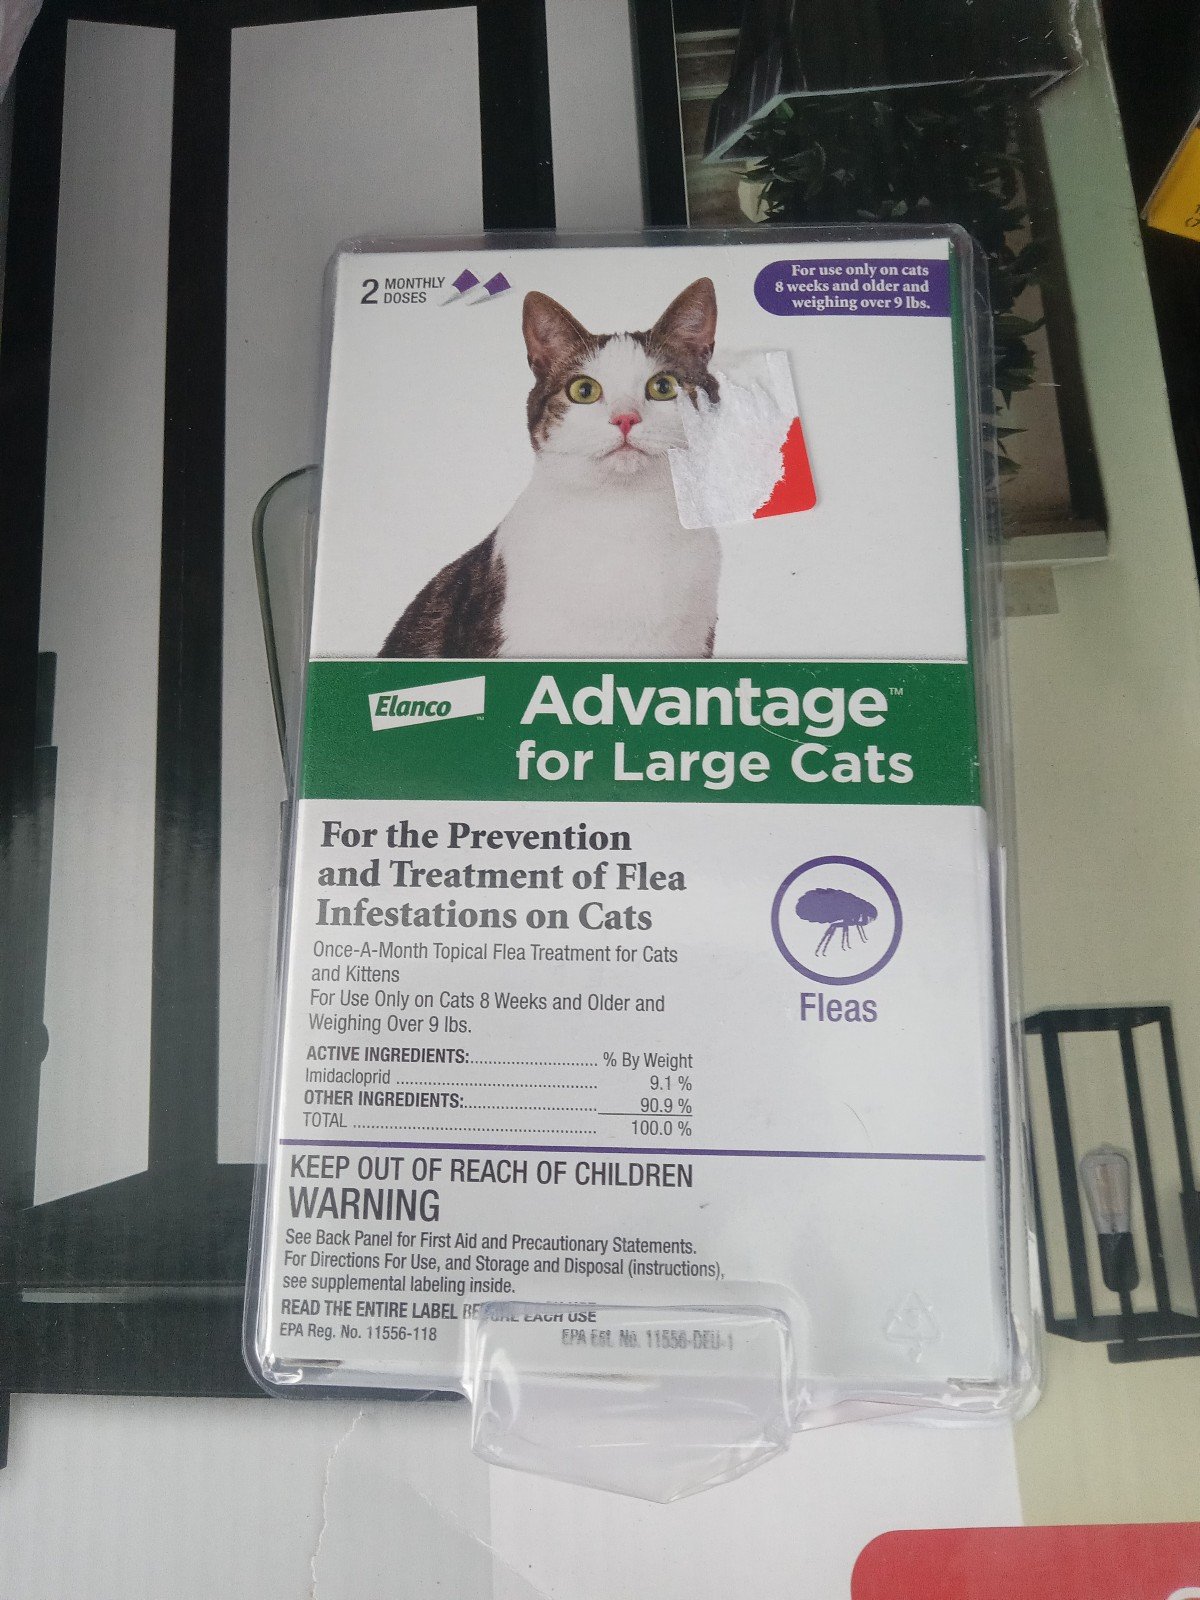 Advantage flea and tick 2 doese for large cats over 9lbs I78FdfZao